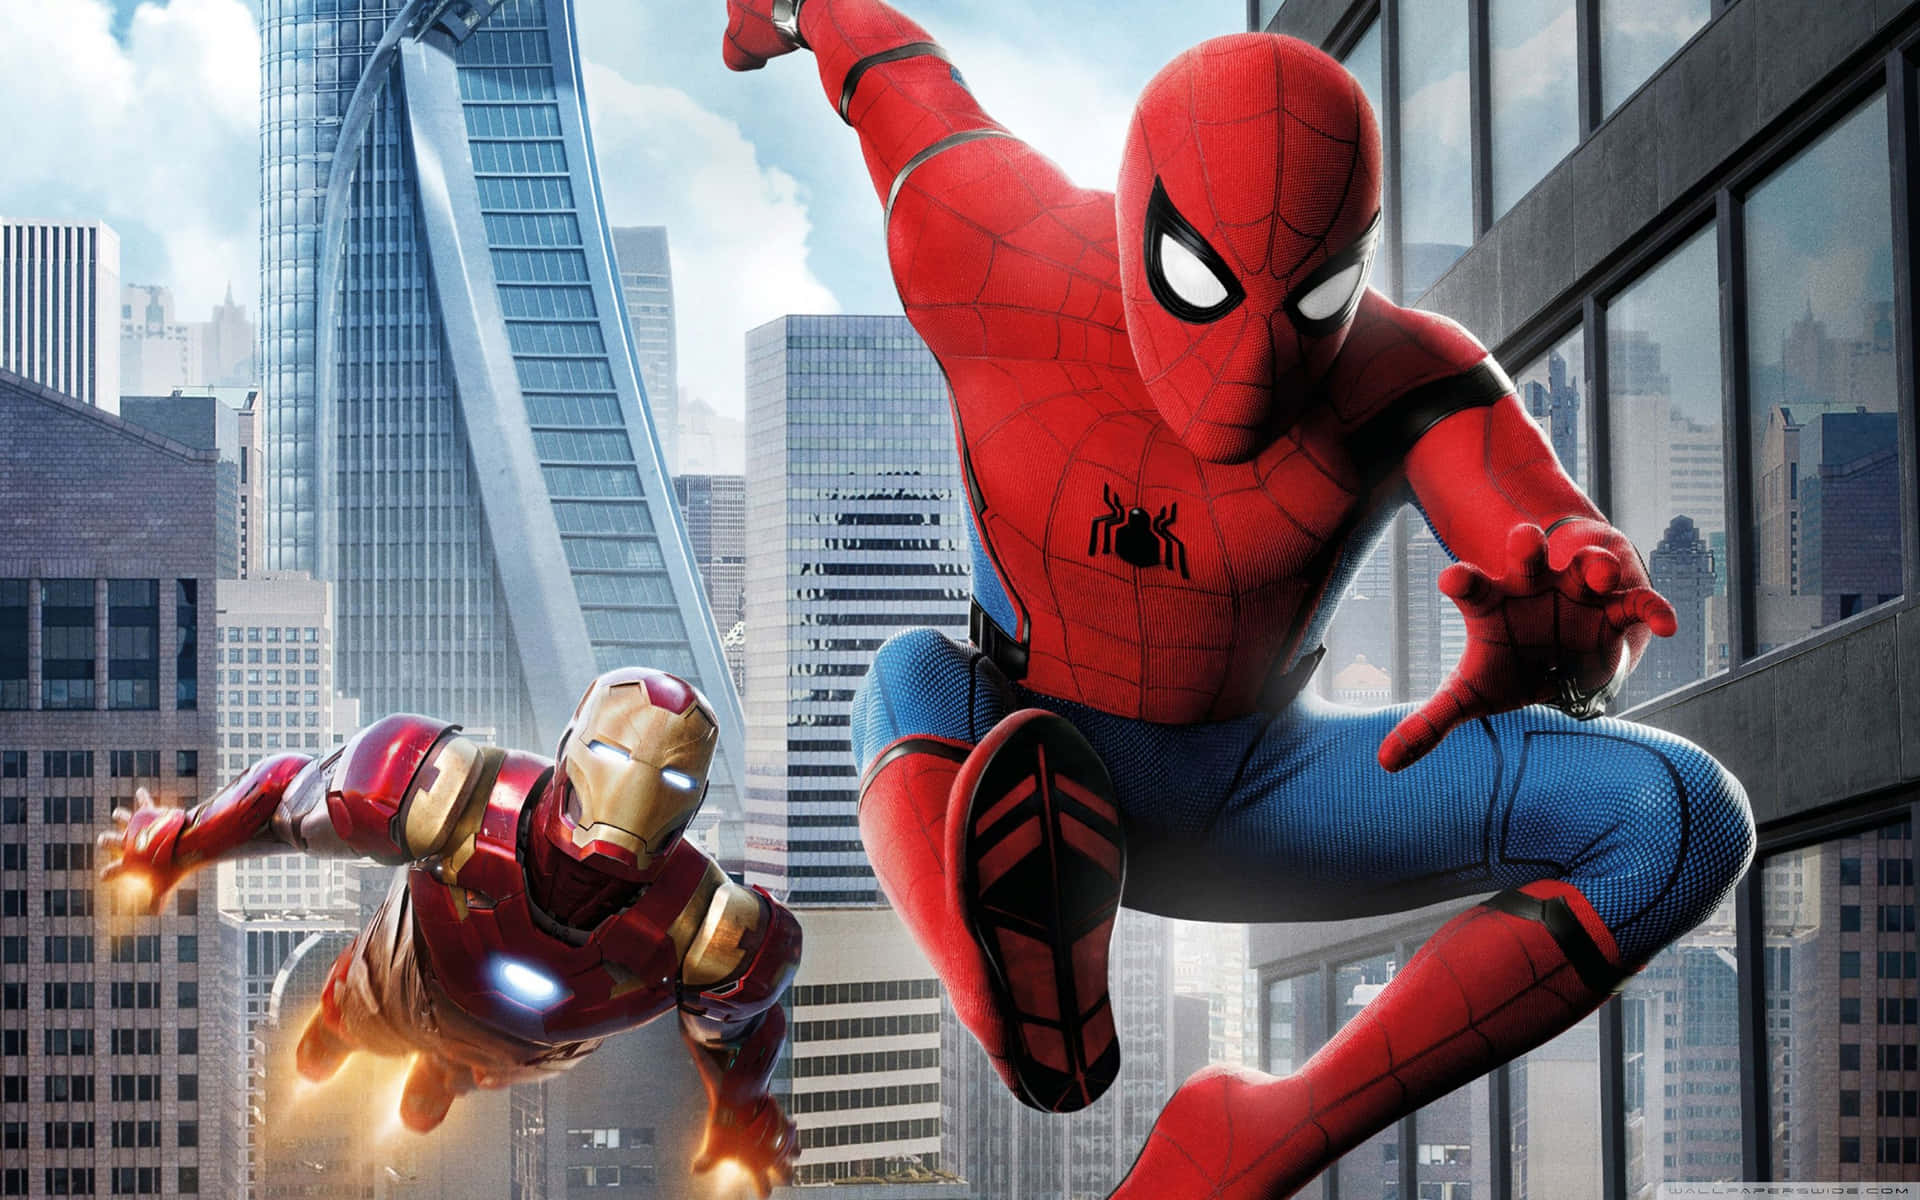 Spider-Man and Iron Man, two iconic superheroes come together in epic battle. Wallpaper